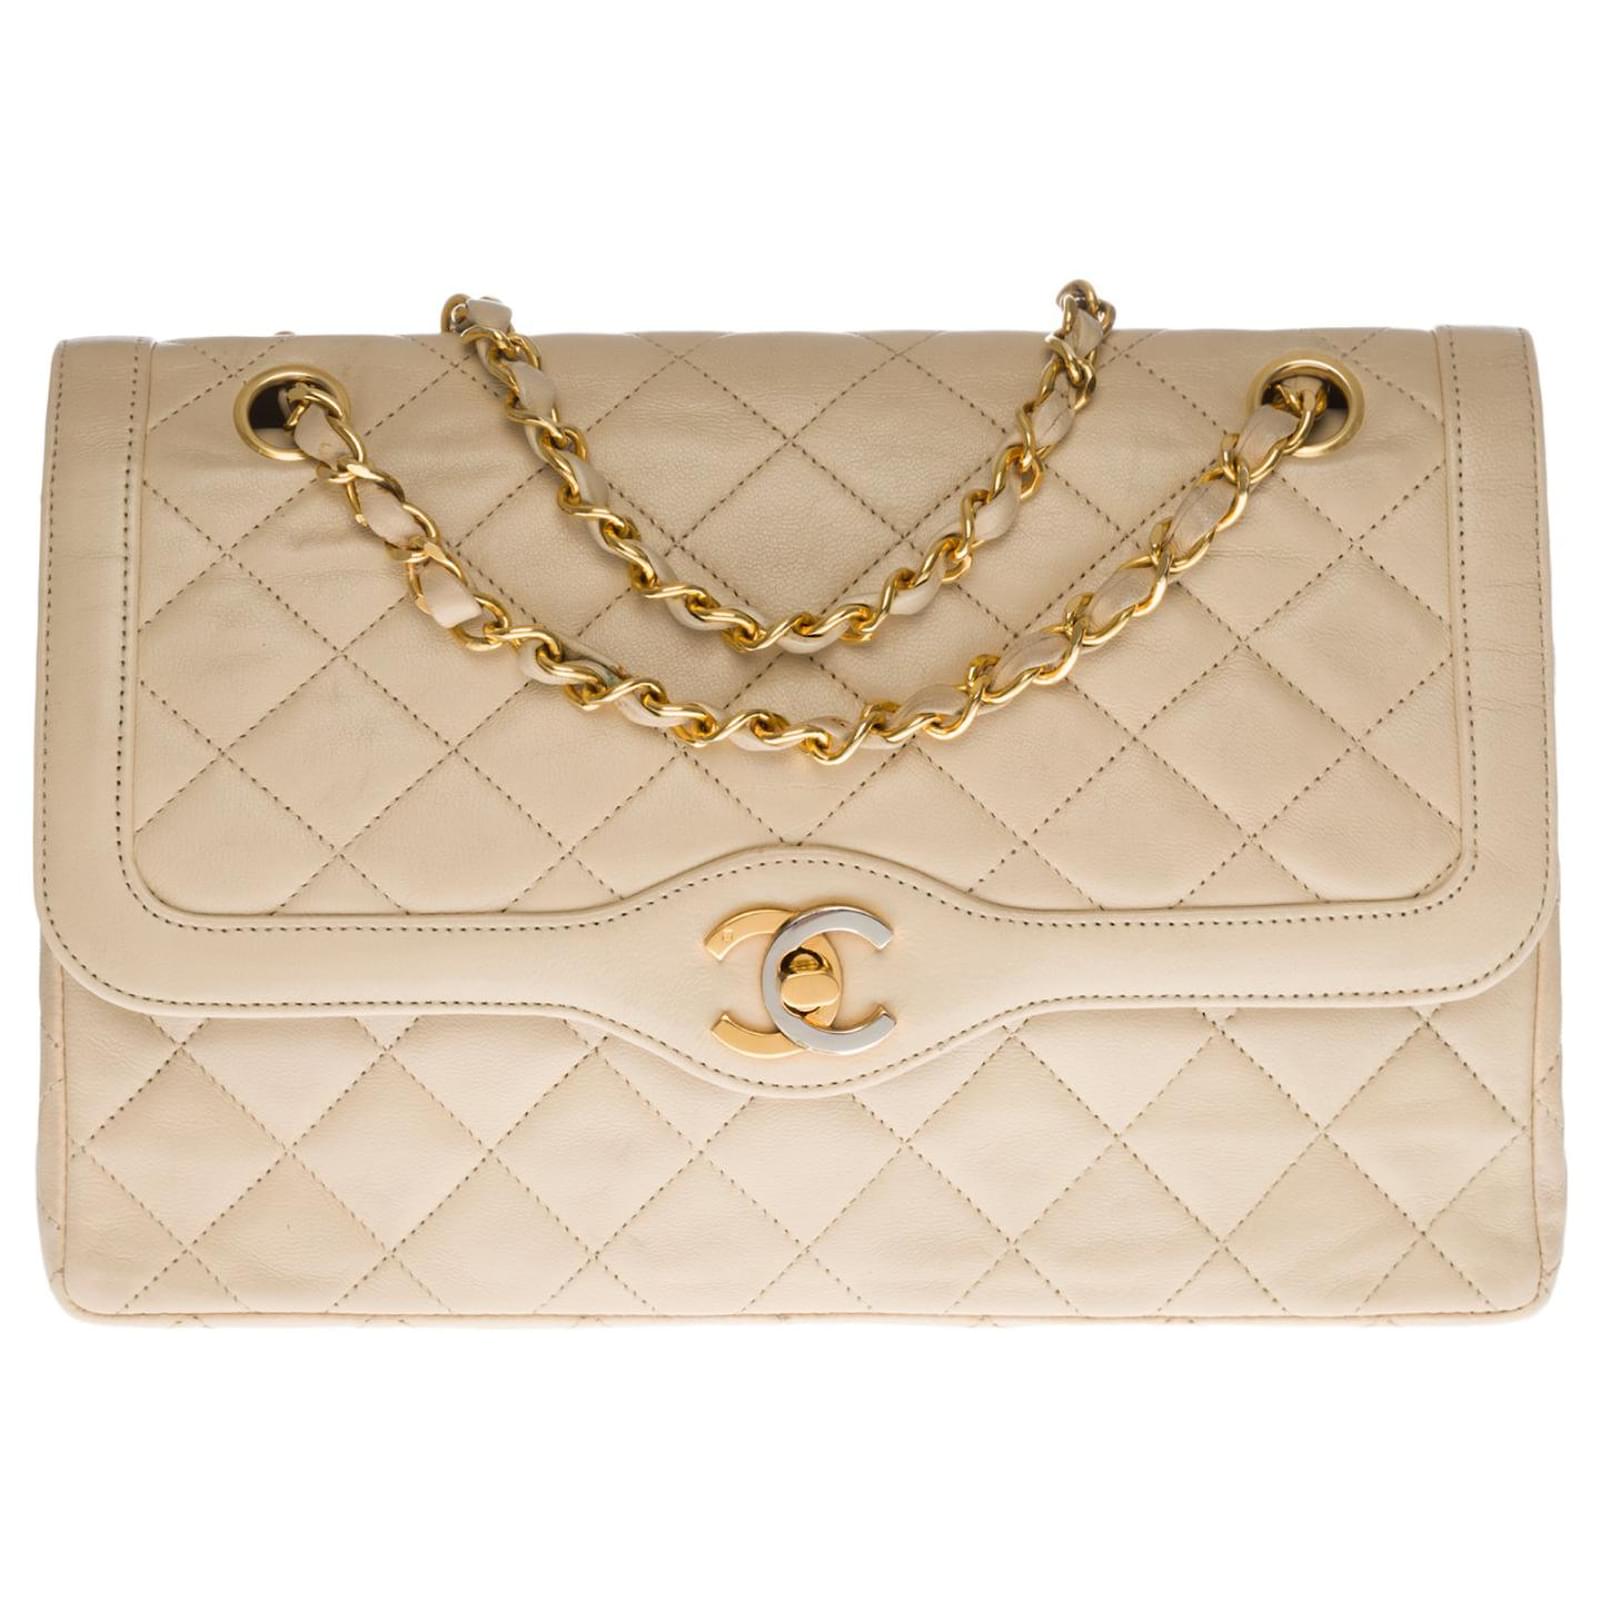 Timeless Very chic and Rare Chanel Classique lined flap shoulder